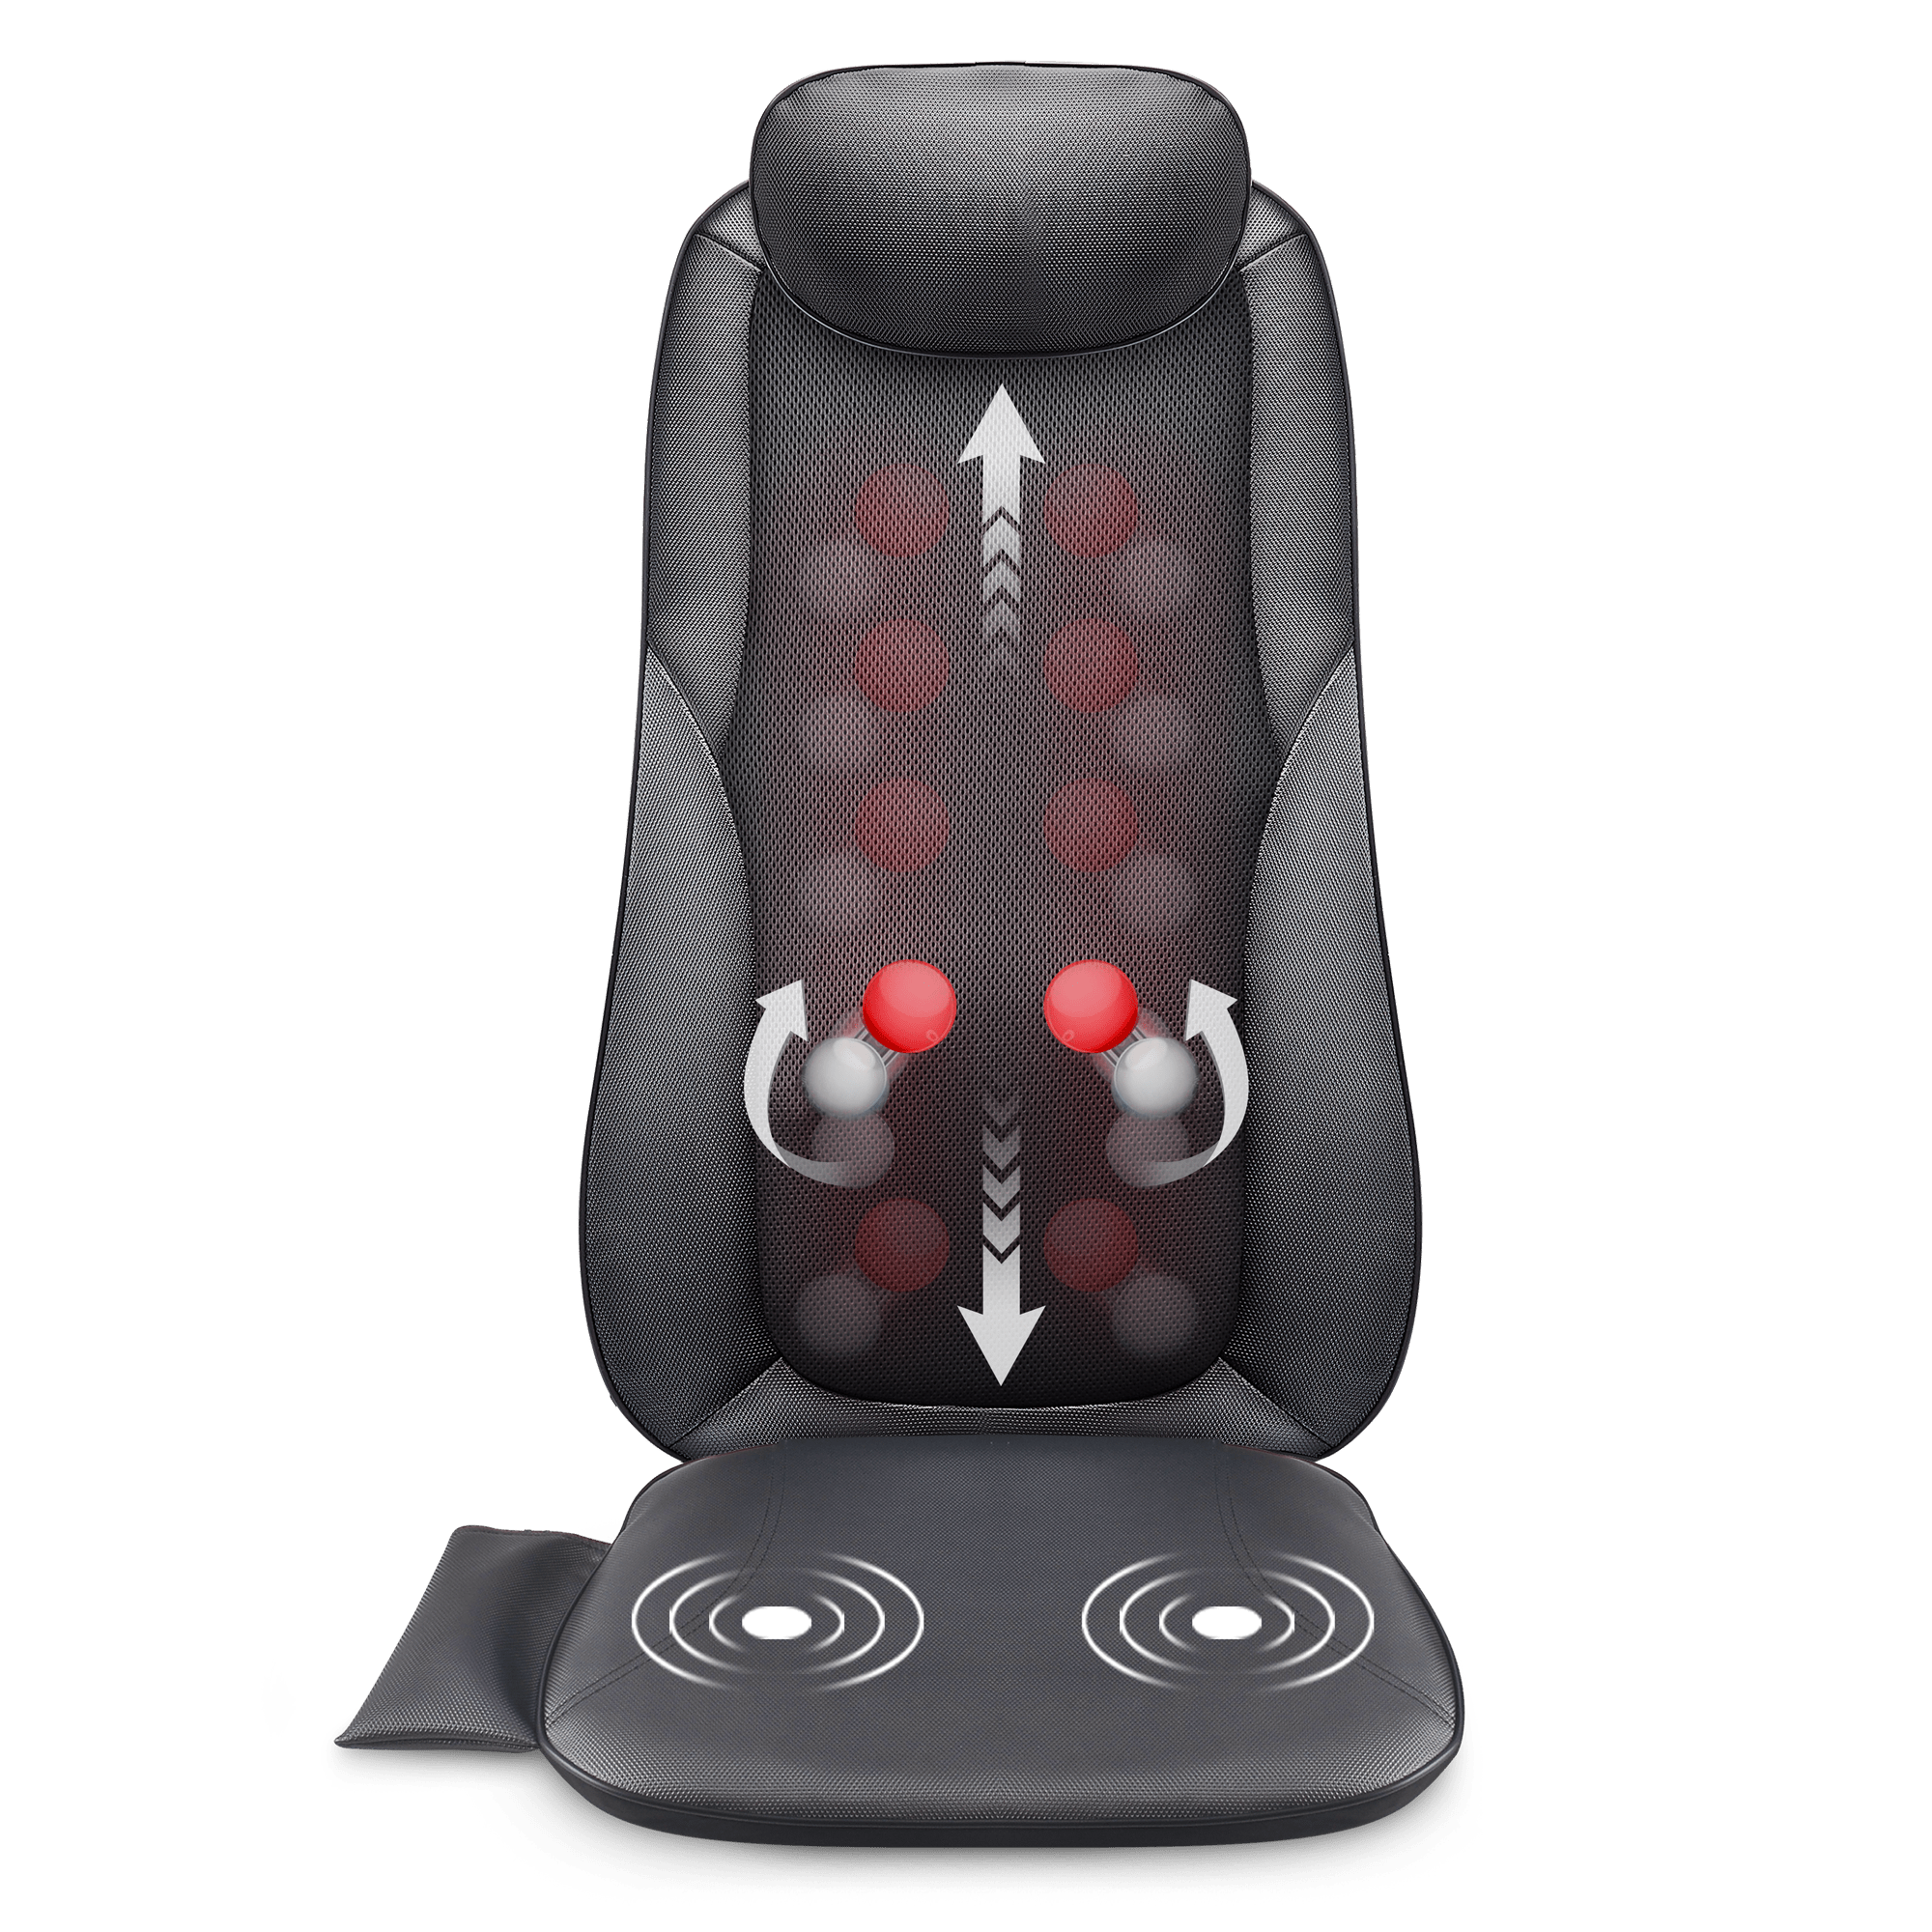 Snailax Vibration Massage Seat Cushion with Heat 6 Vibrating Motors and 2  Heat Levels, Back Massager, Massage Chair Pad for Home Office use